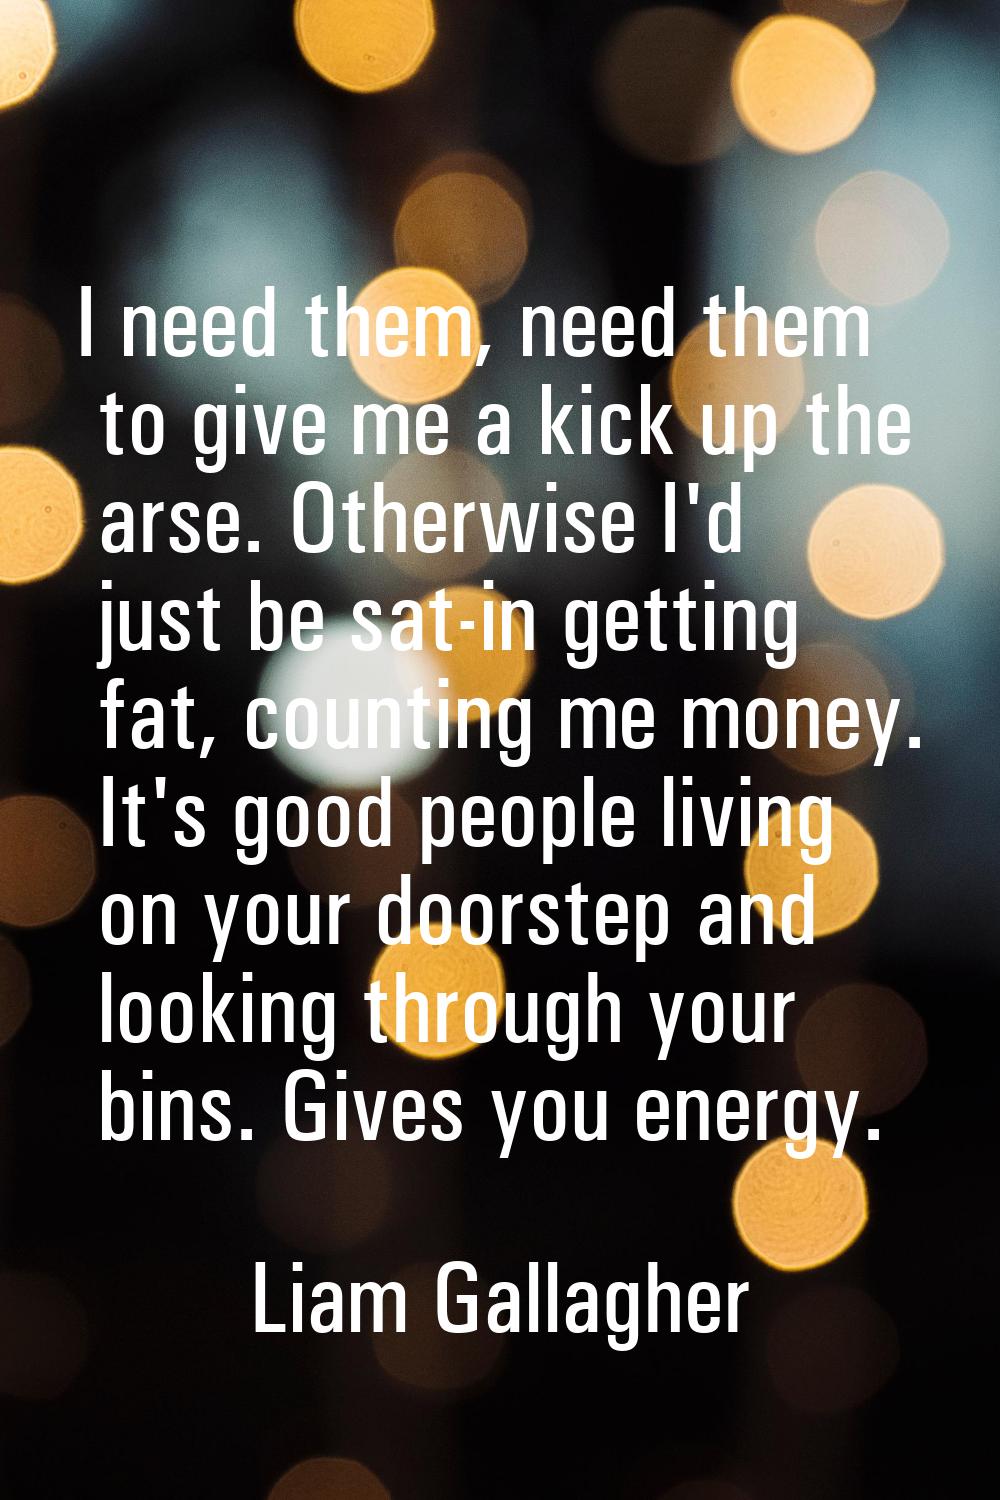 I need them, need them to give me a kick up the arse. Otherwise I'd just be sat-in getting fat, cou